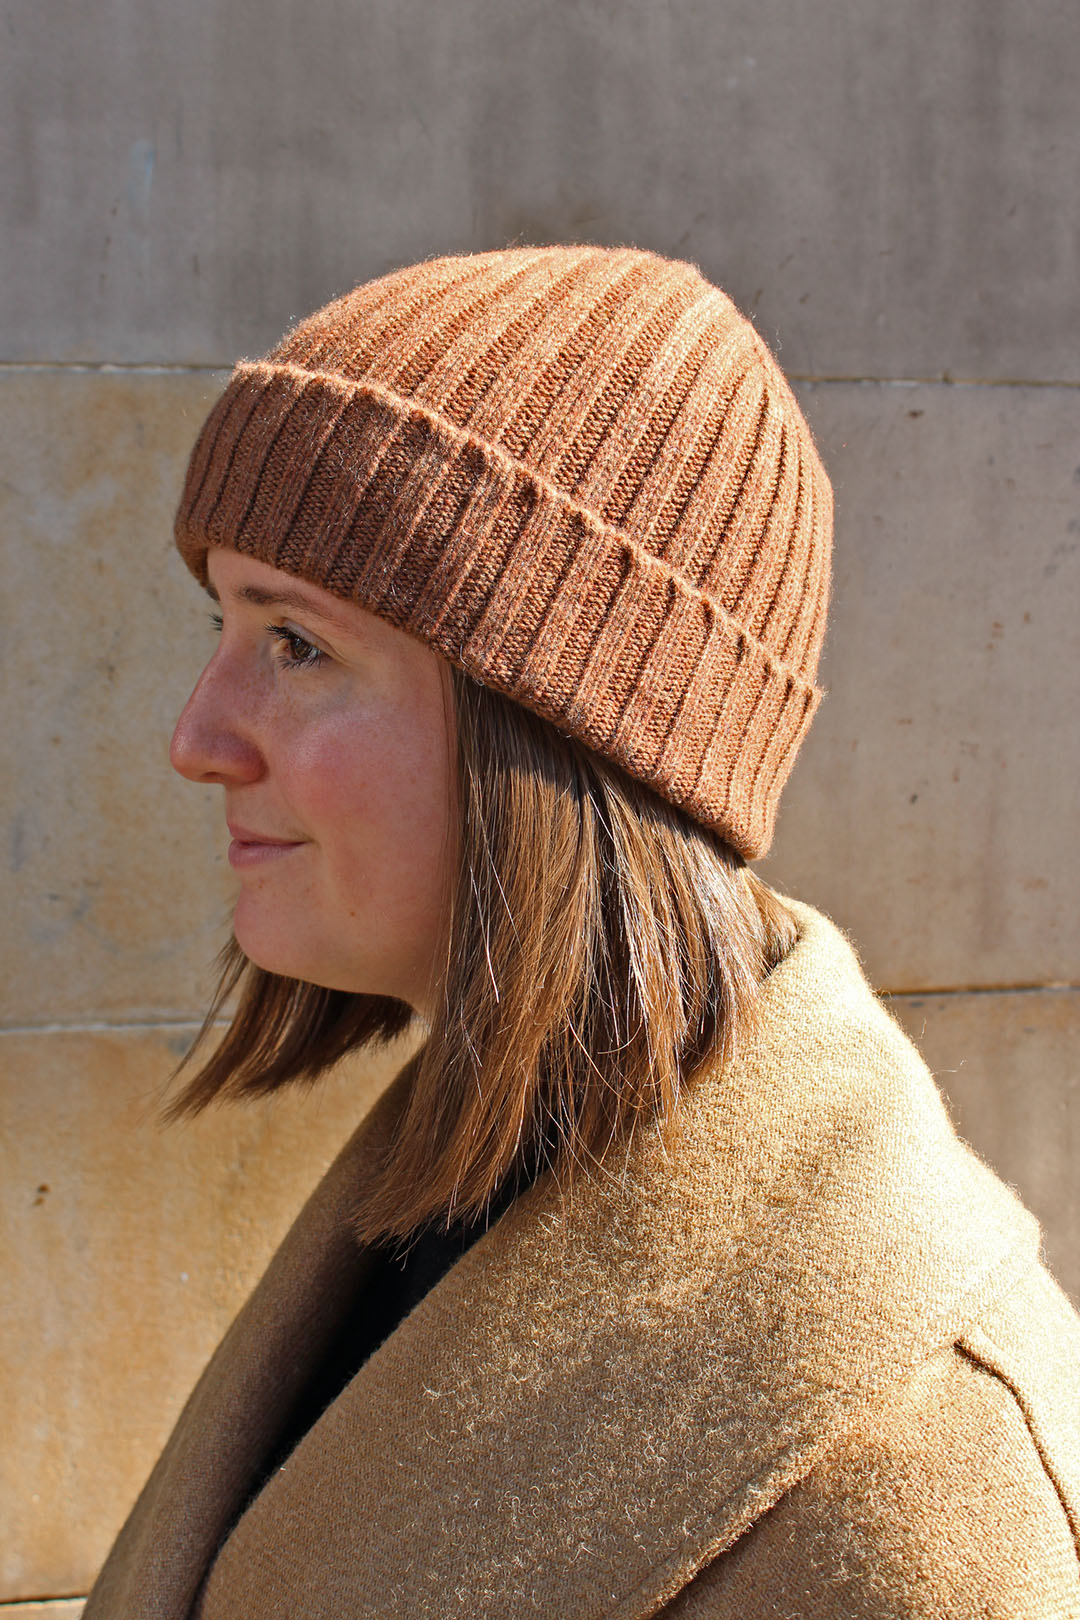 Knitted cashmere cairn hat in hazelnut, knitted in scotland